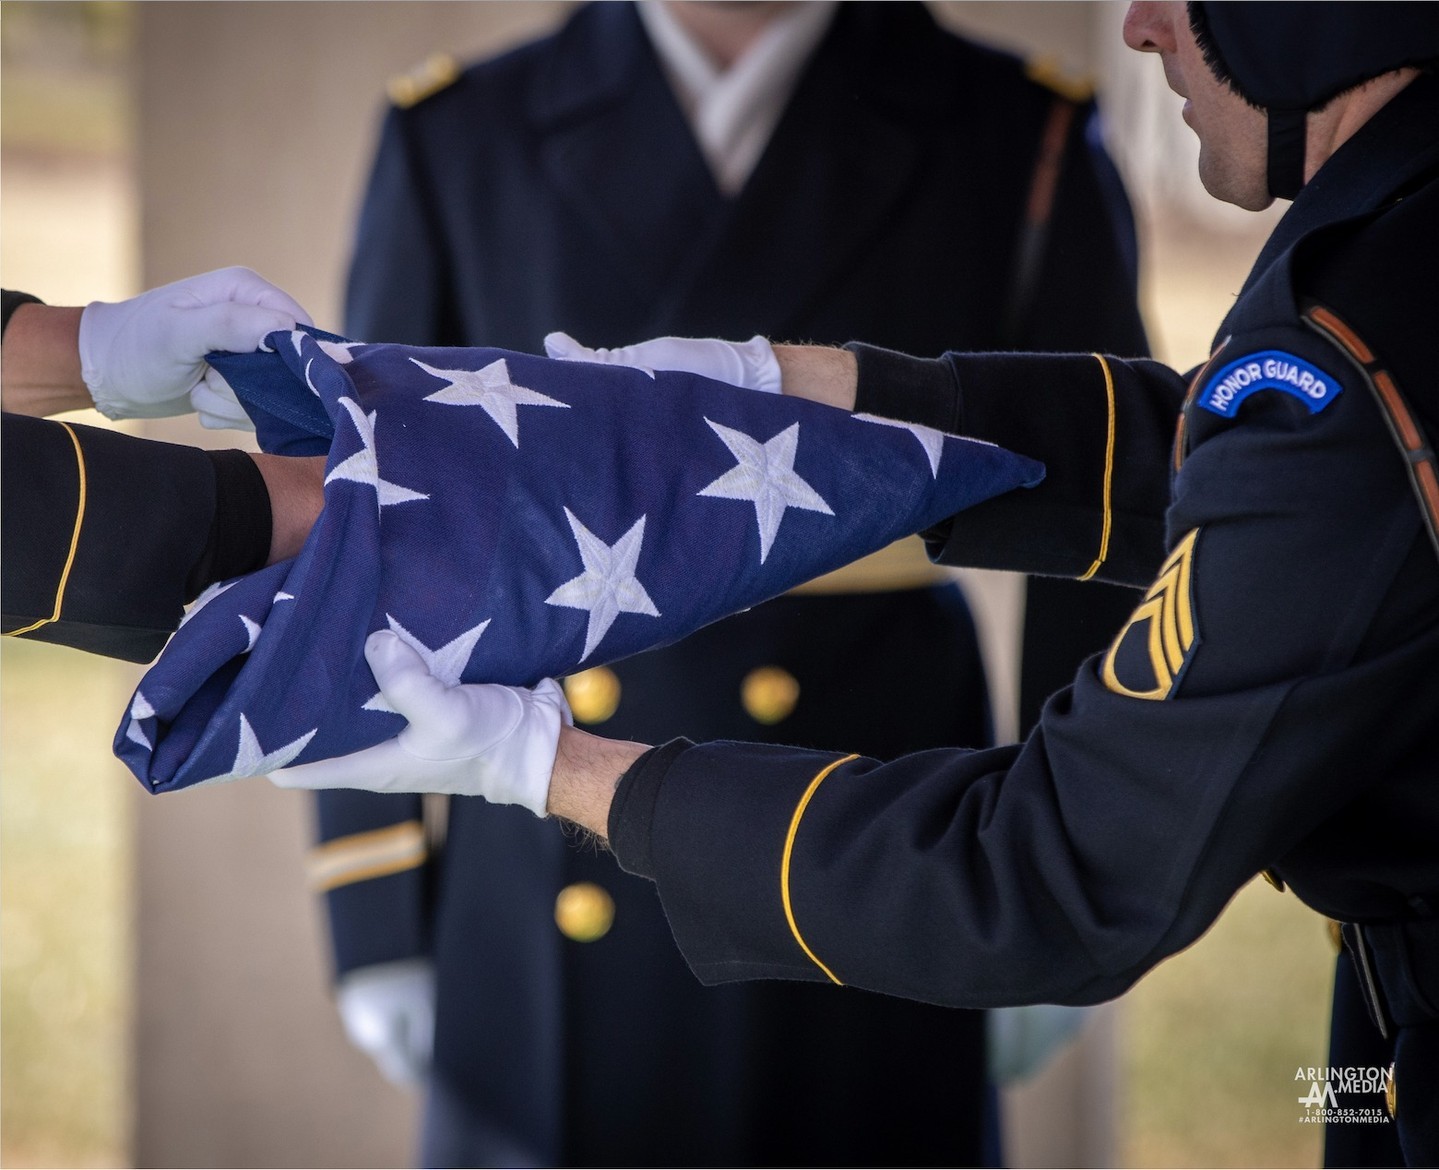 A flag is carefully folded during a section in the Millennium Section of Arlington National Cemetery.

The Millennium expansion allows for the growth of this national memorial and provides 31,000 new burial spaces and structures, extensive stream restoration, landscape design, retaining walls, perimeter fencing, and vehicle and pedestrian access roads and walkways, all carefully designed to honor the site’s historic character.

PC: @arlingtonmedia